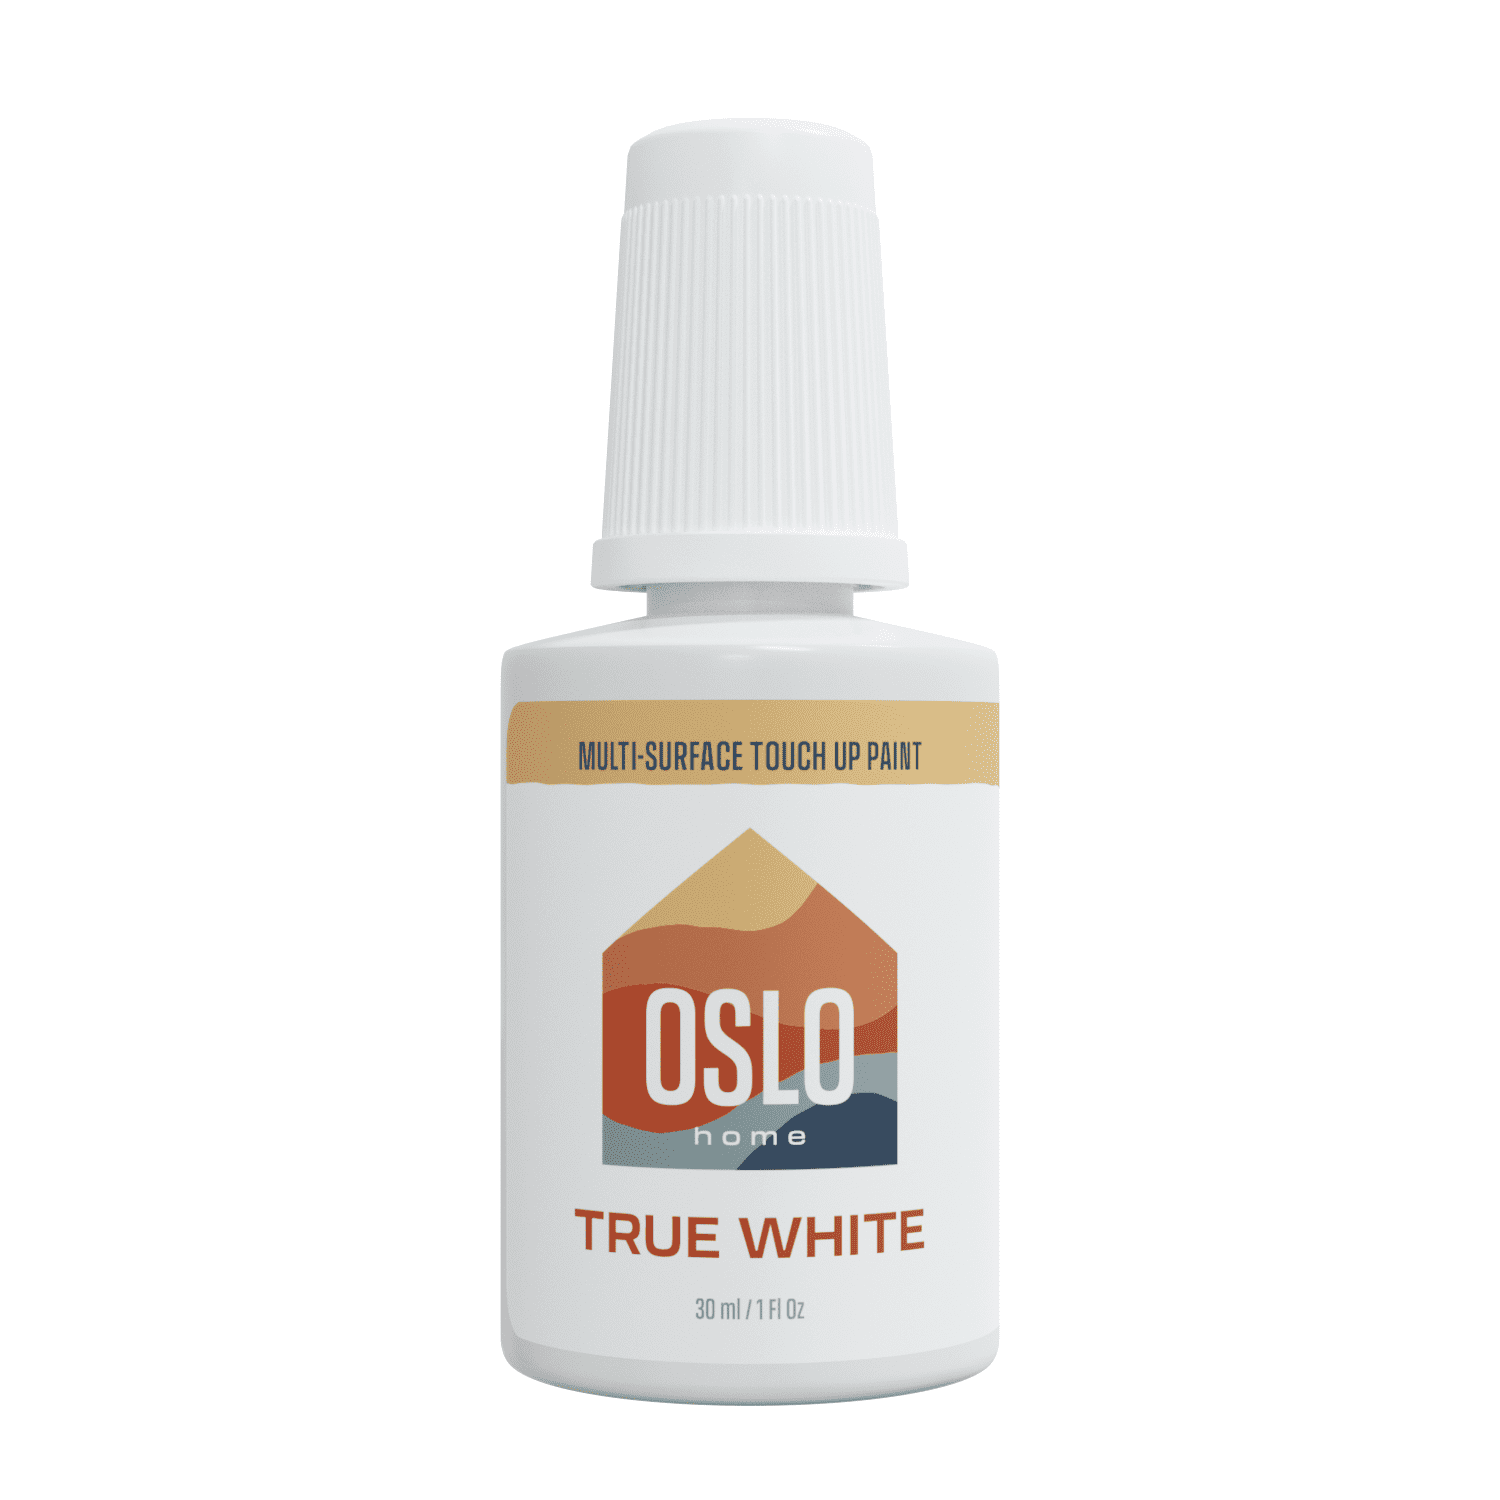 Oslo Home Touch Up Paint, 30ml True White Matte Finish, Made in